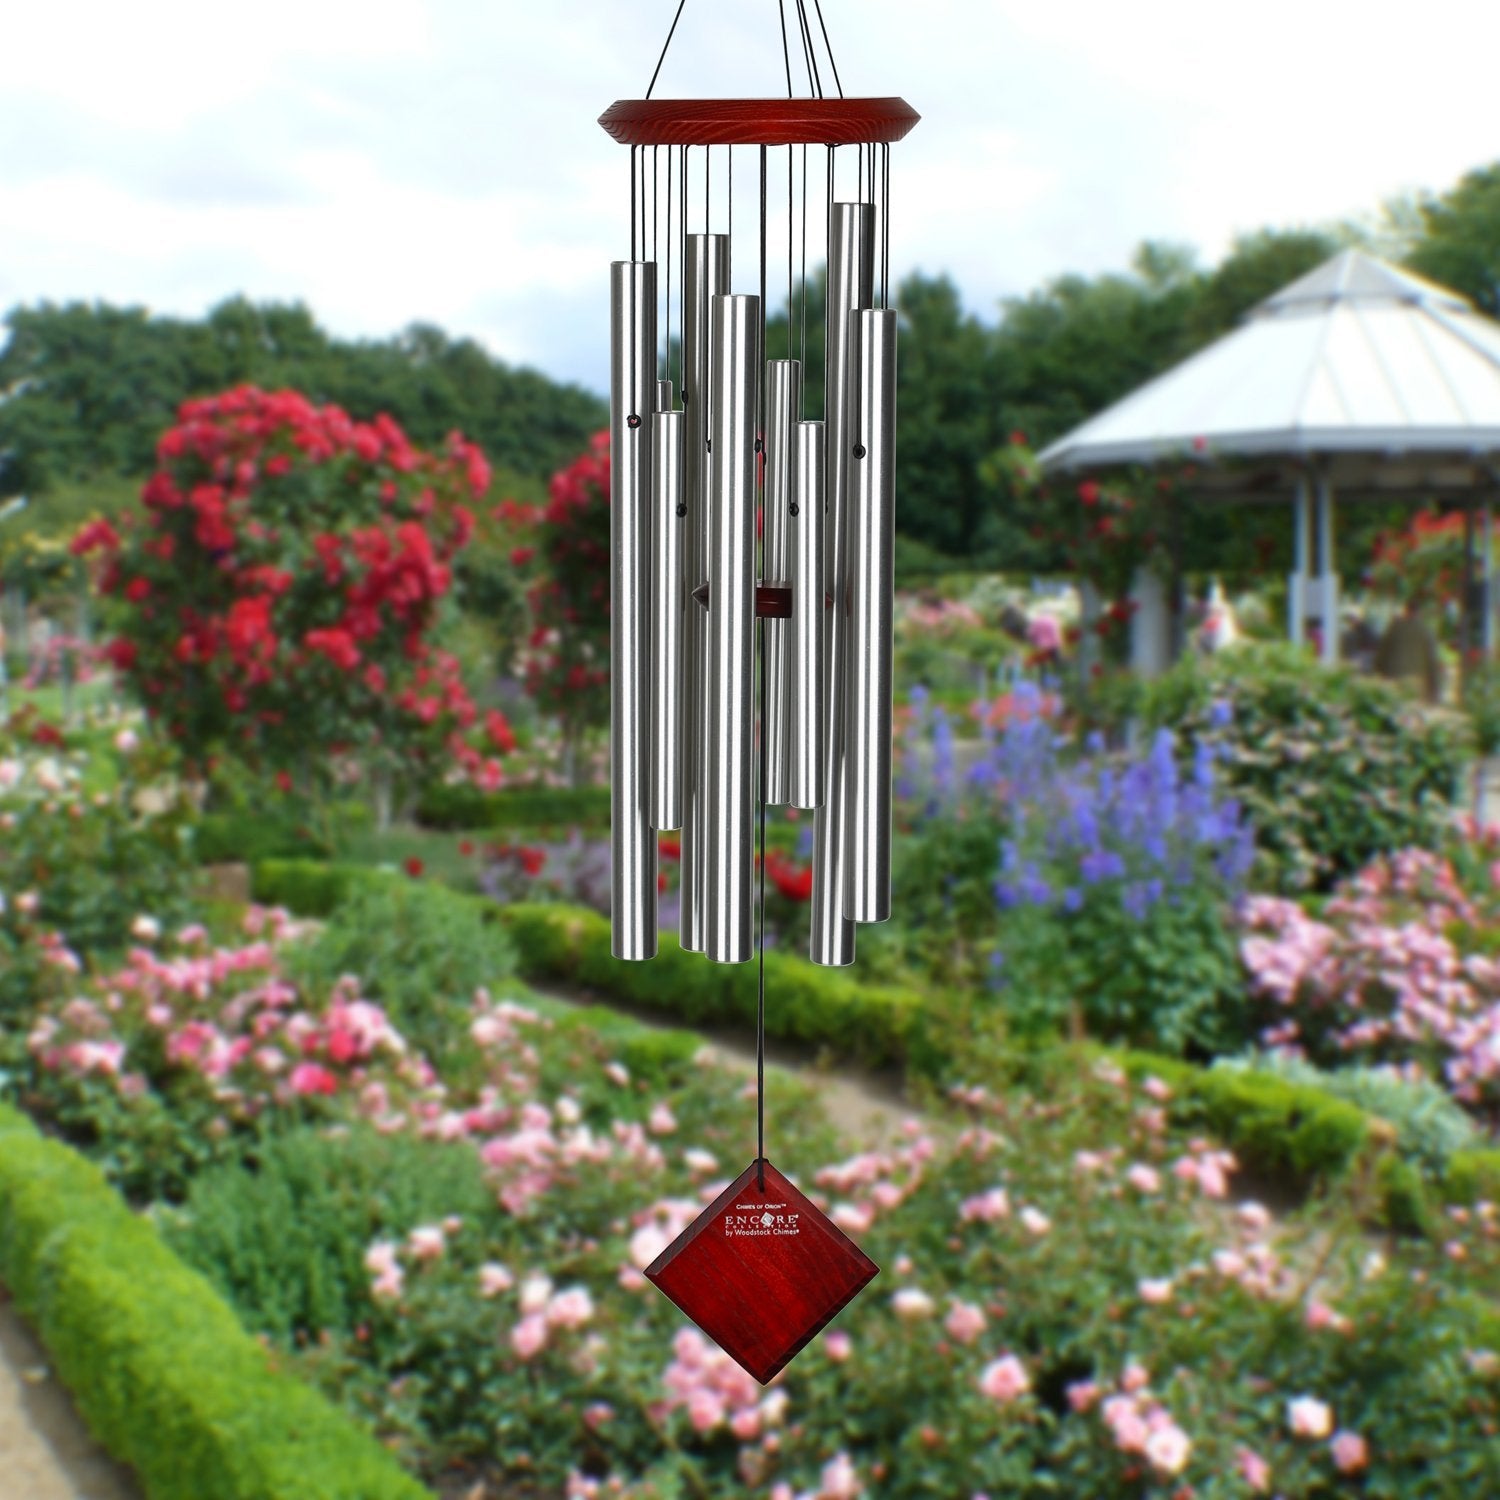 Encore Chimes of Orion - Silver lifestyle image